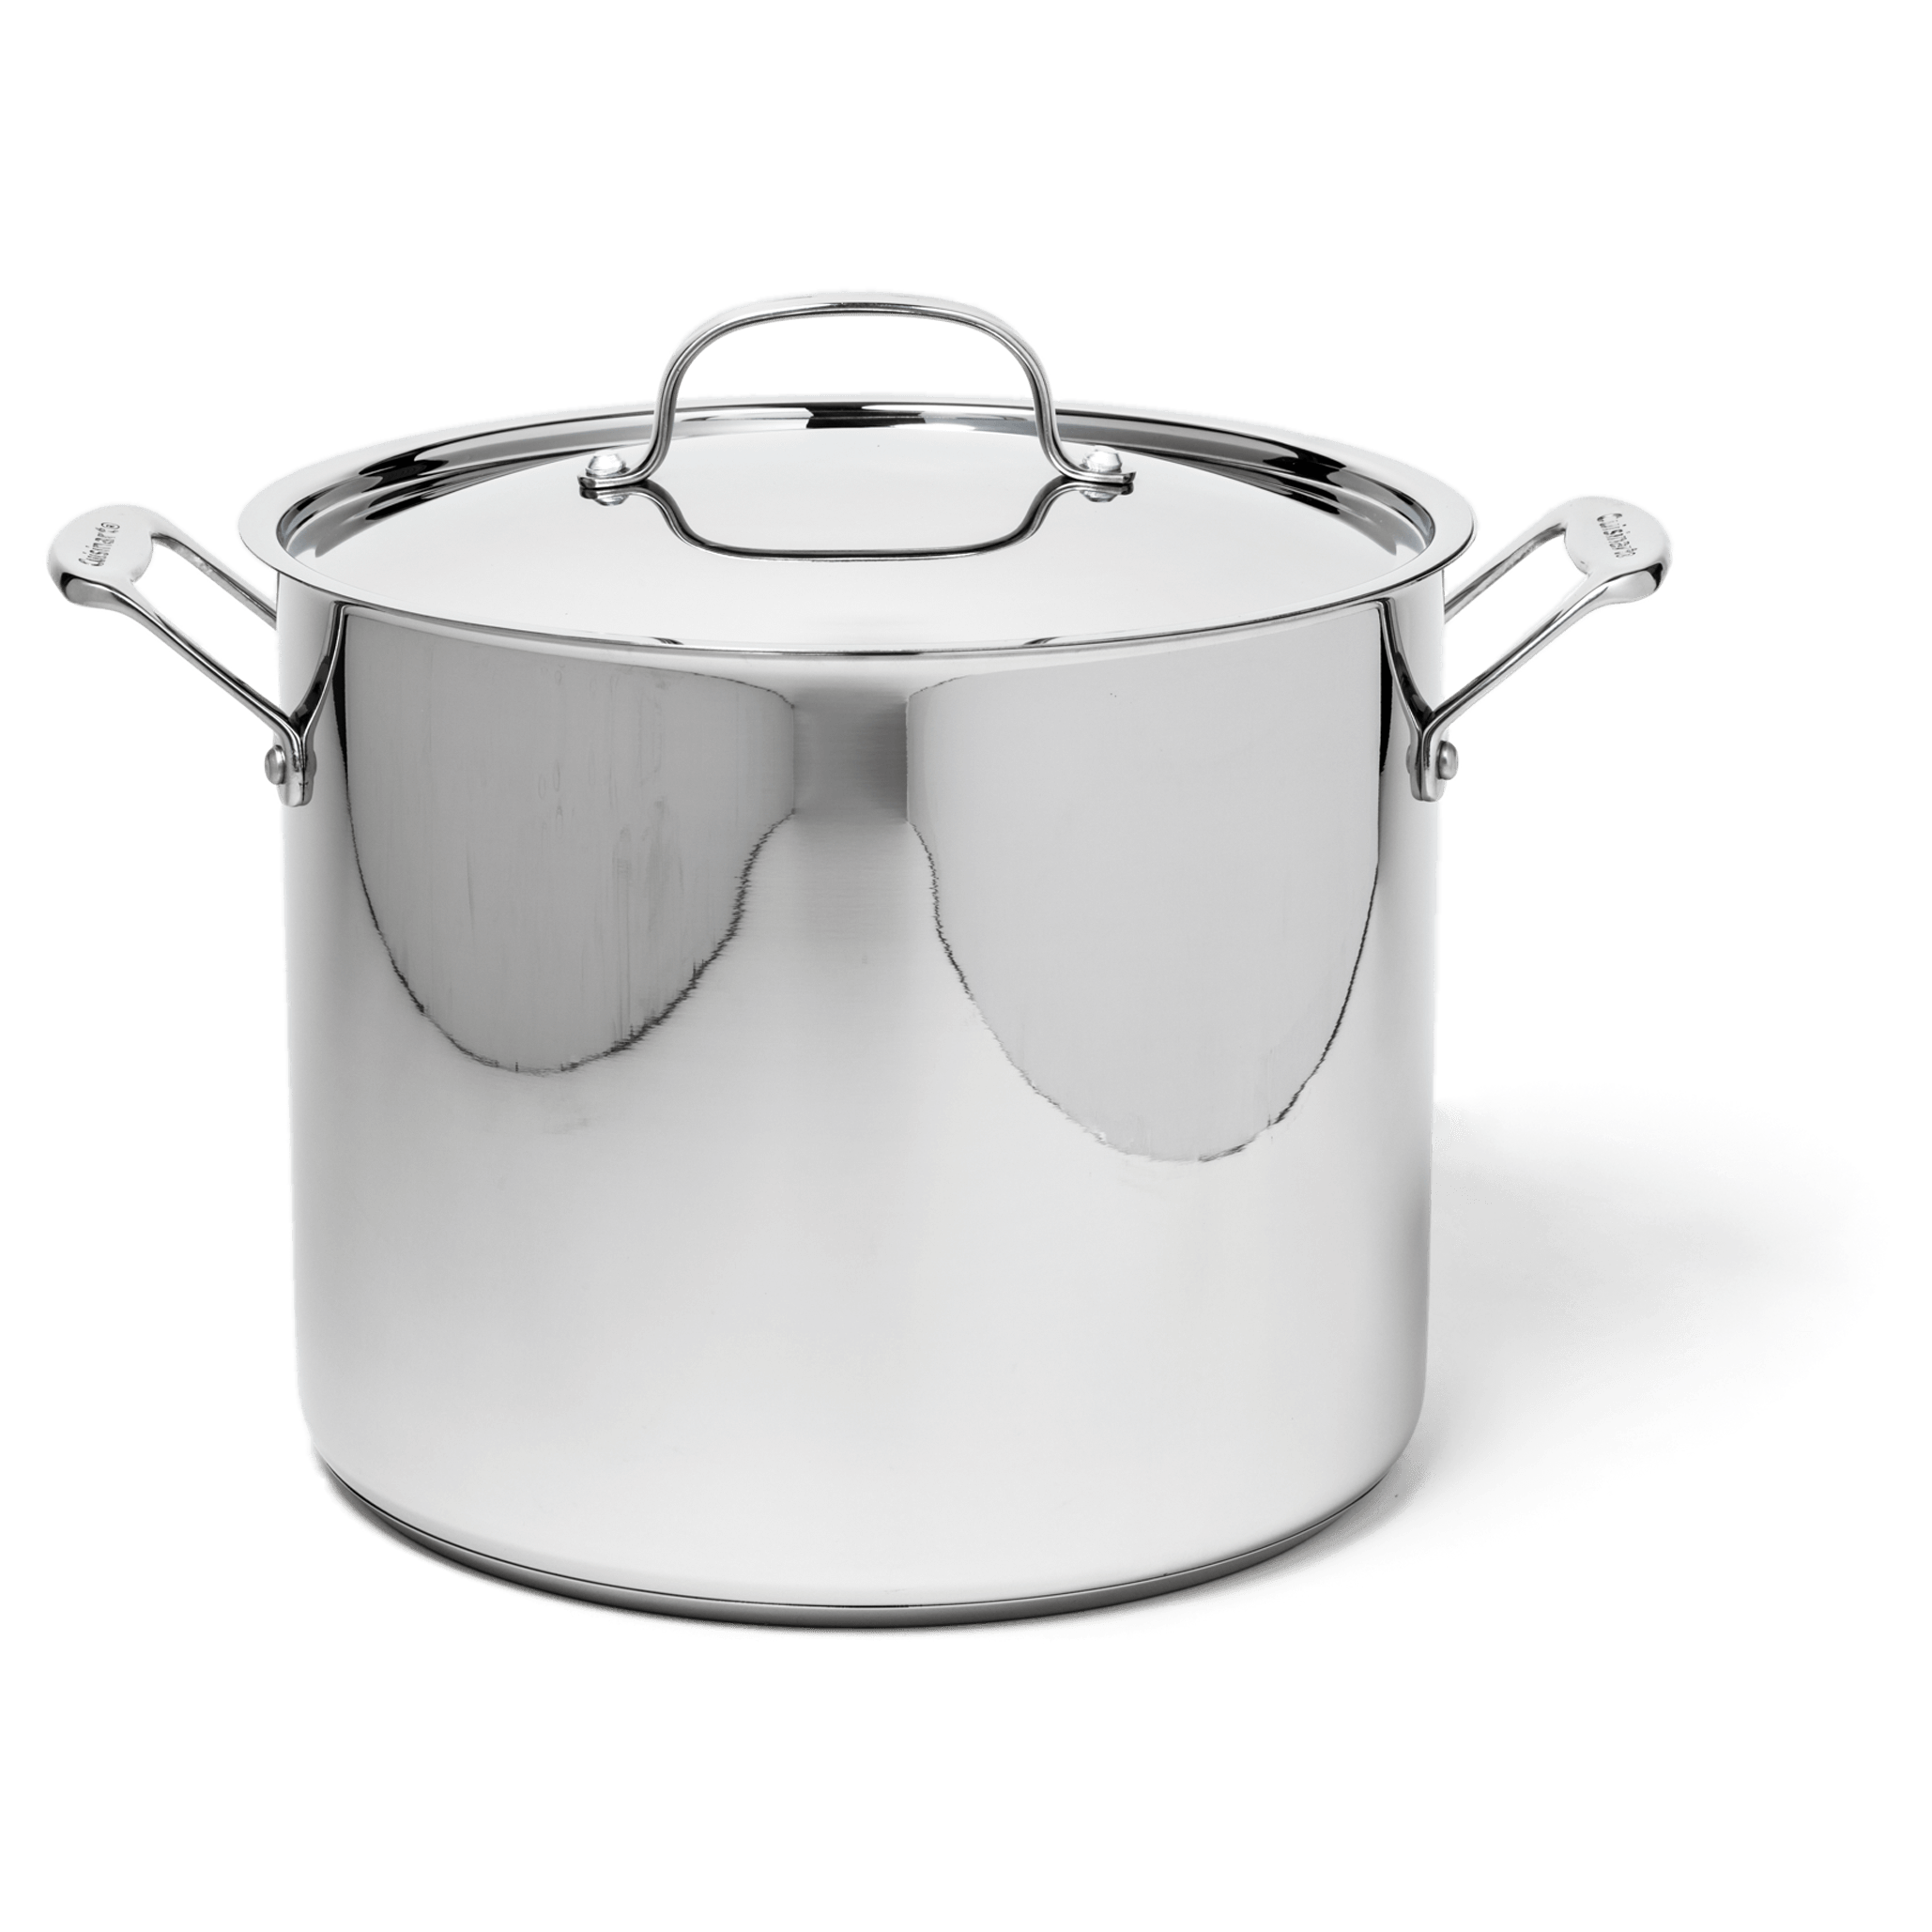 https://res.cloudinary.com/hksqkdlah/image/upload/SIL_Cuisinart_Chefs-Classic-12-Quart-Stockpot-with-Cover_26_spjhyj.png